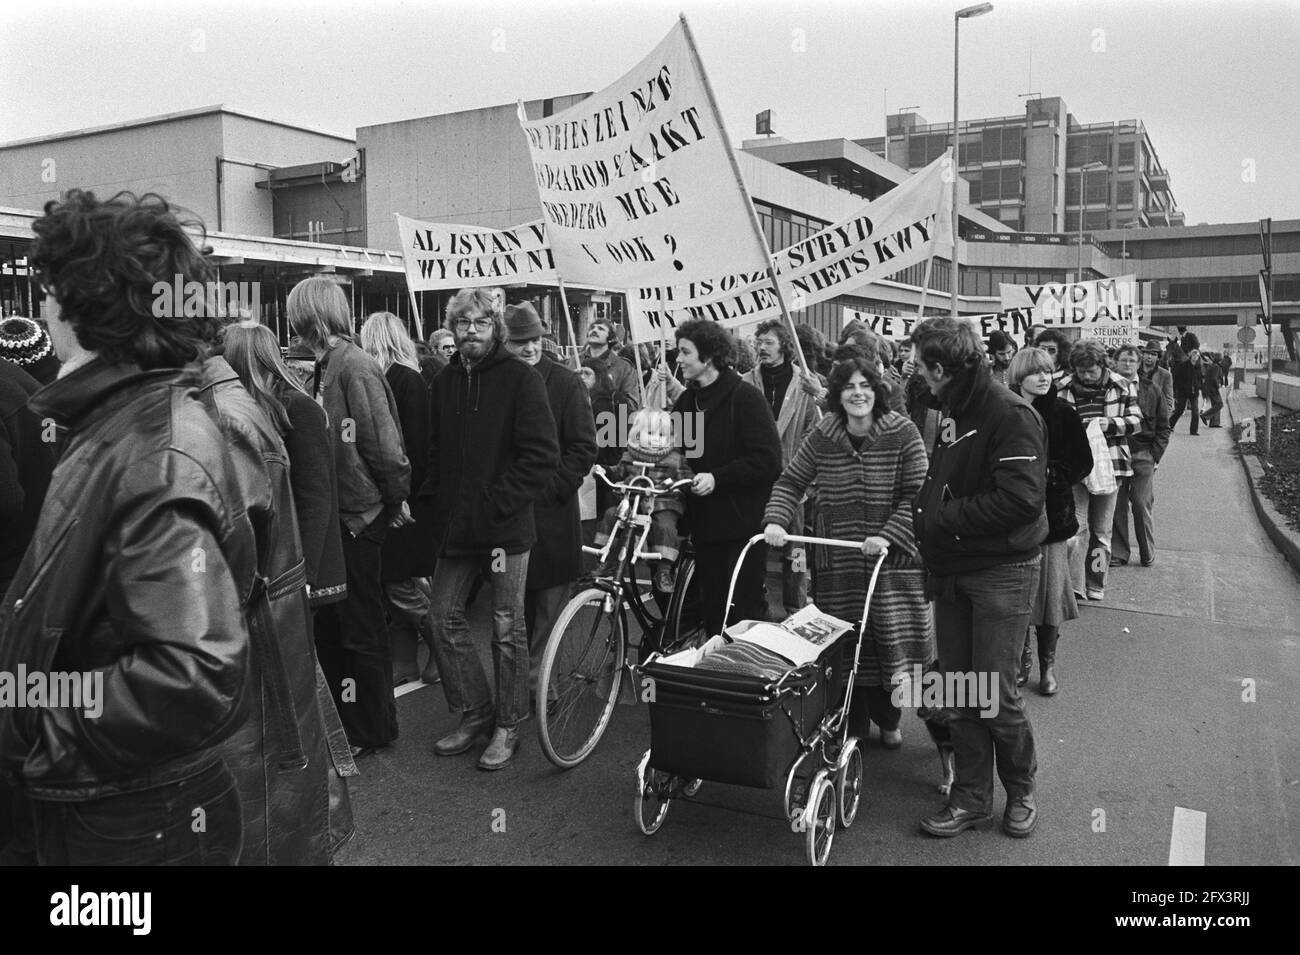 Demonstration for better working conditions in Utrecht; (VVDM solidary), 16 February 1977, demonstrations, The Netherlands, 20th century press agency photo, news to remember, documentary, historic photography 1945-1990, visual stories, human history of the Twentieth Century, capturing moments in time Stock Photo